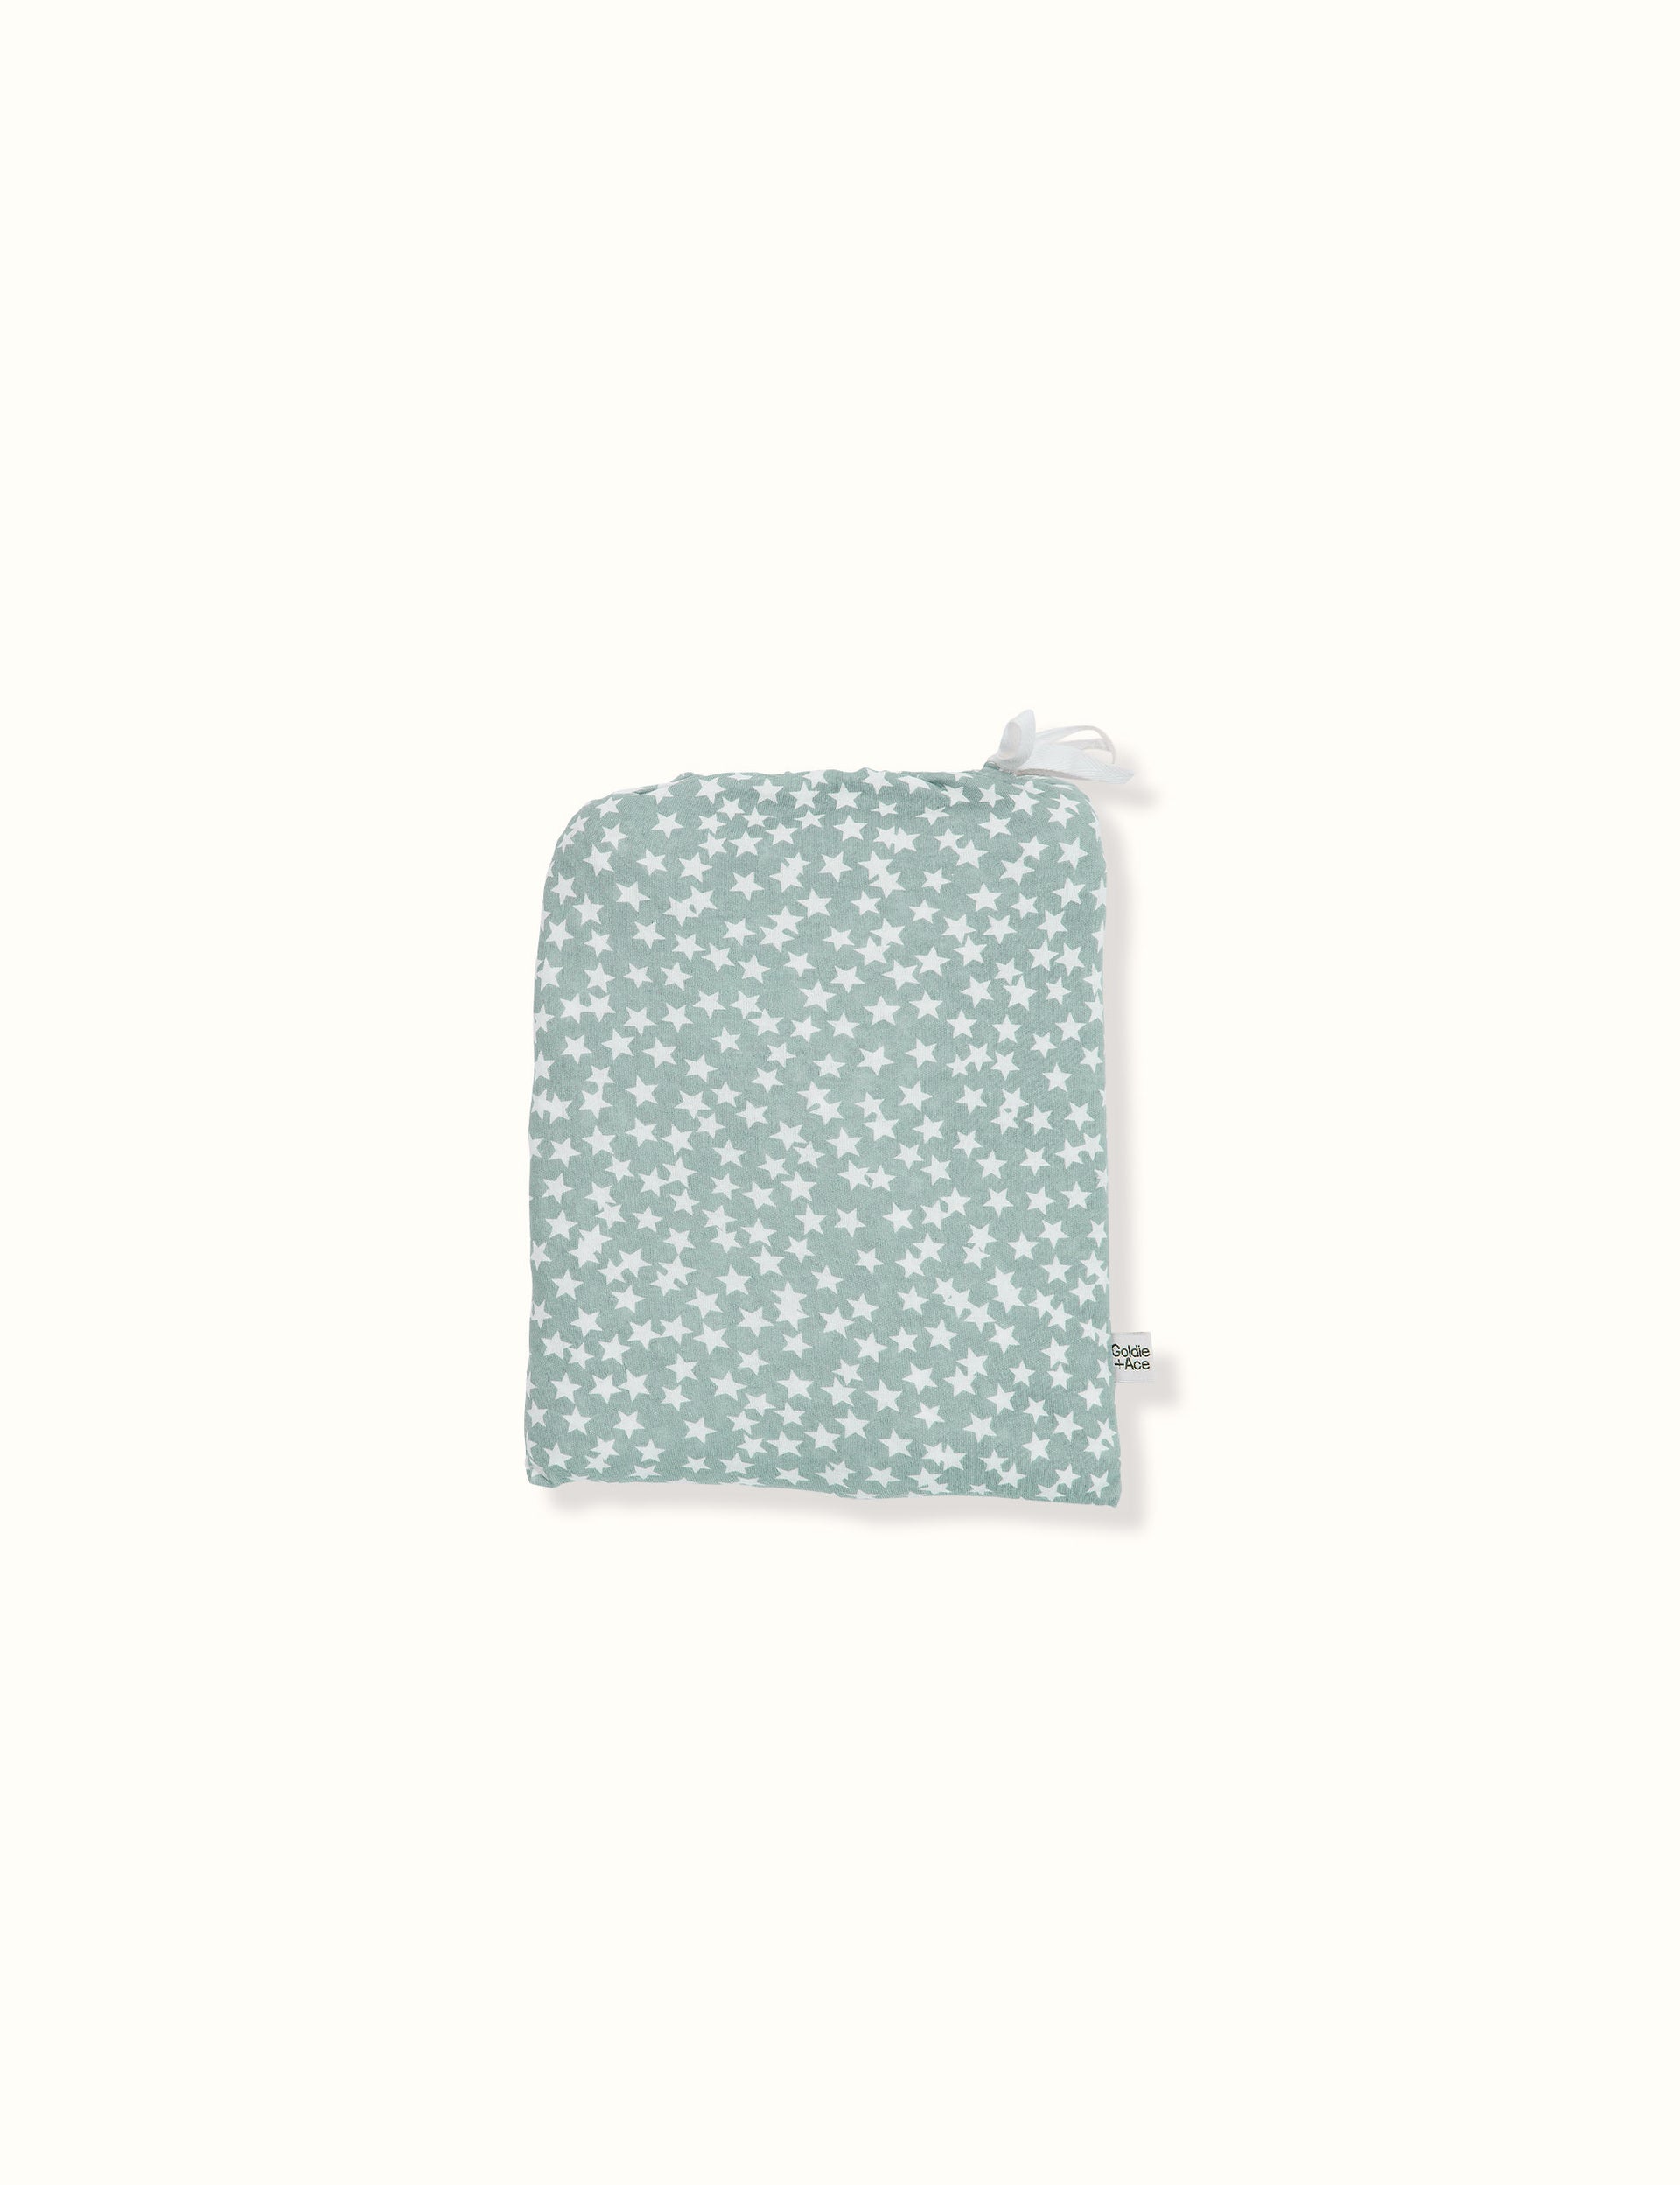 Charlie Stars Print Fitted Sheet Sky